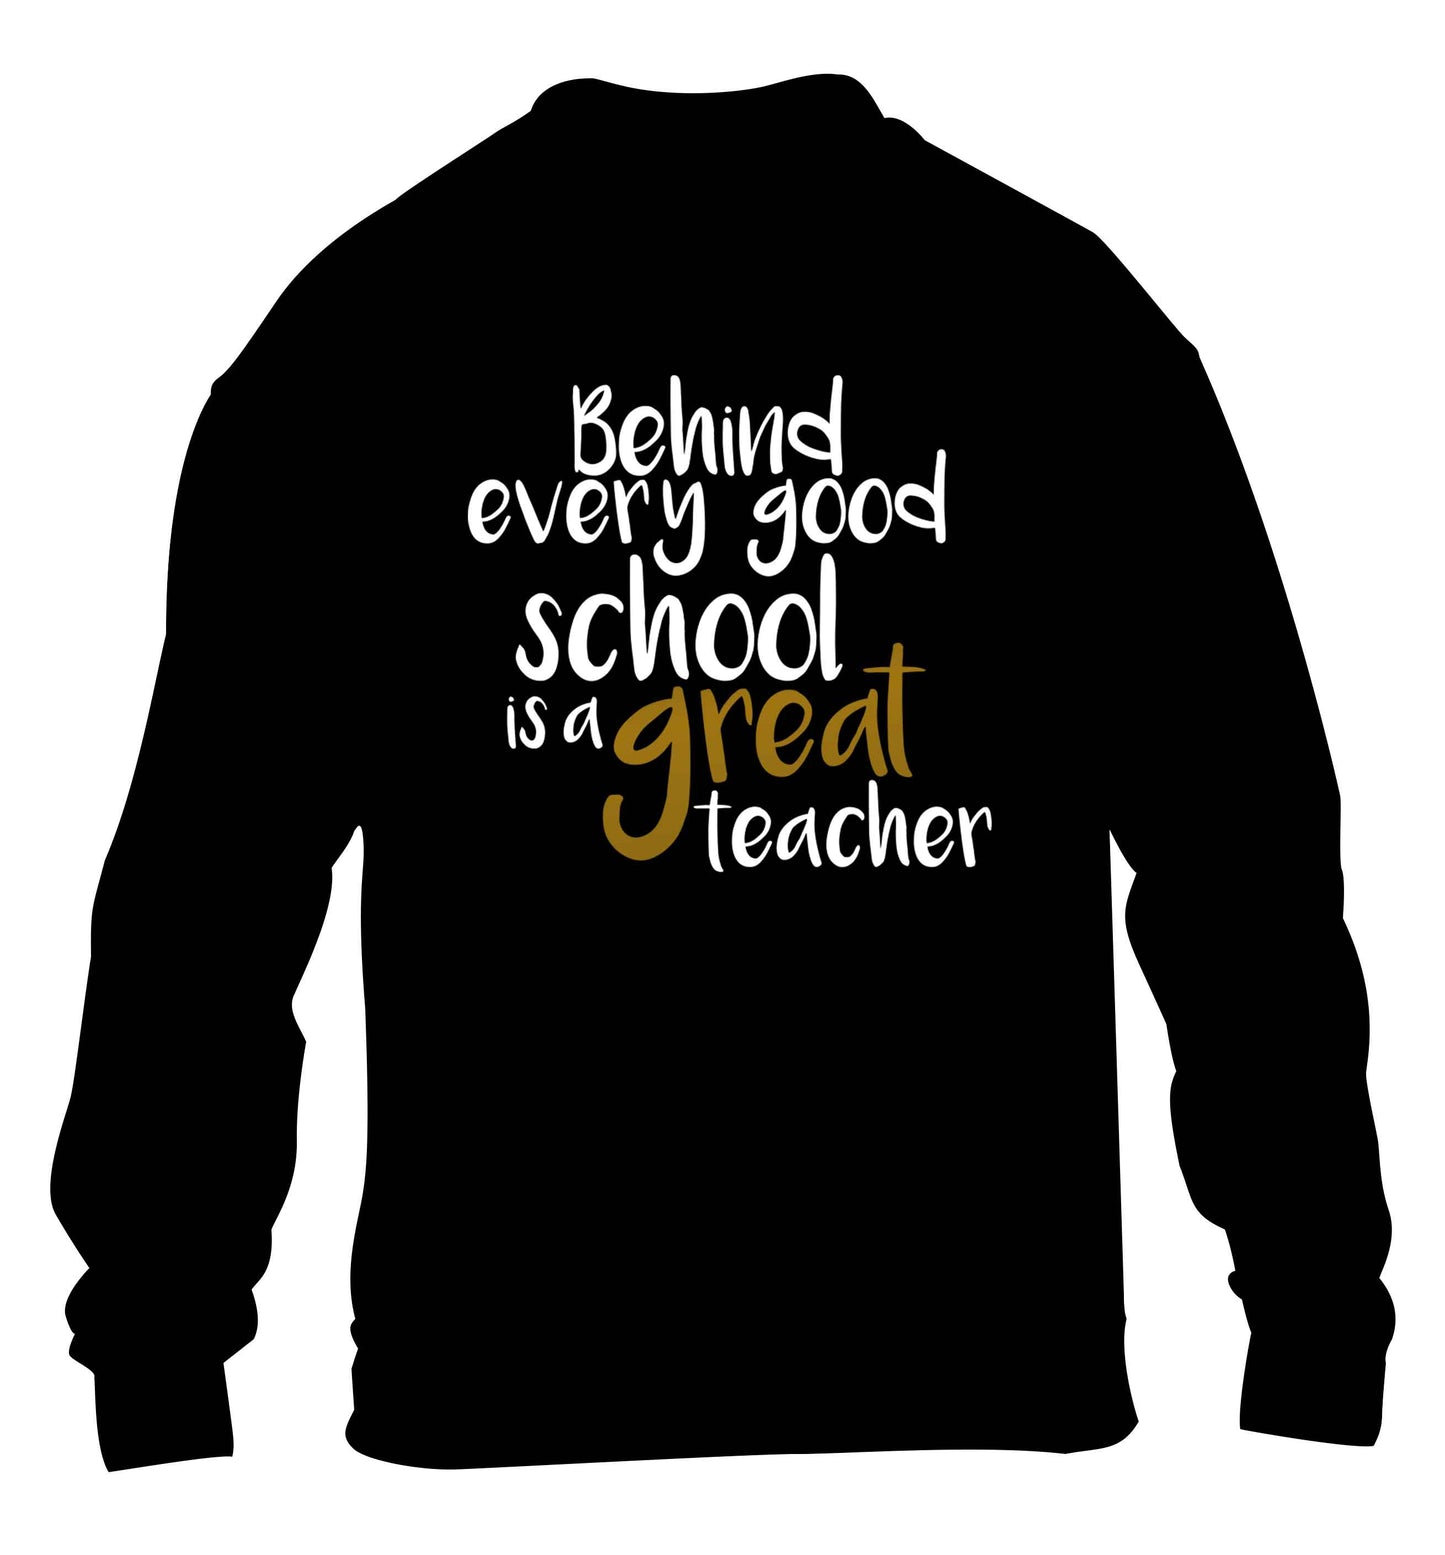 Behind every good school is a great teacher children's black sweater 12-13 Years